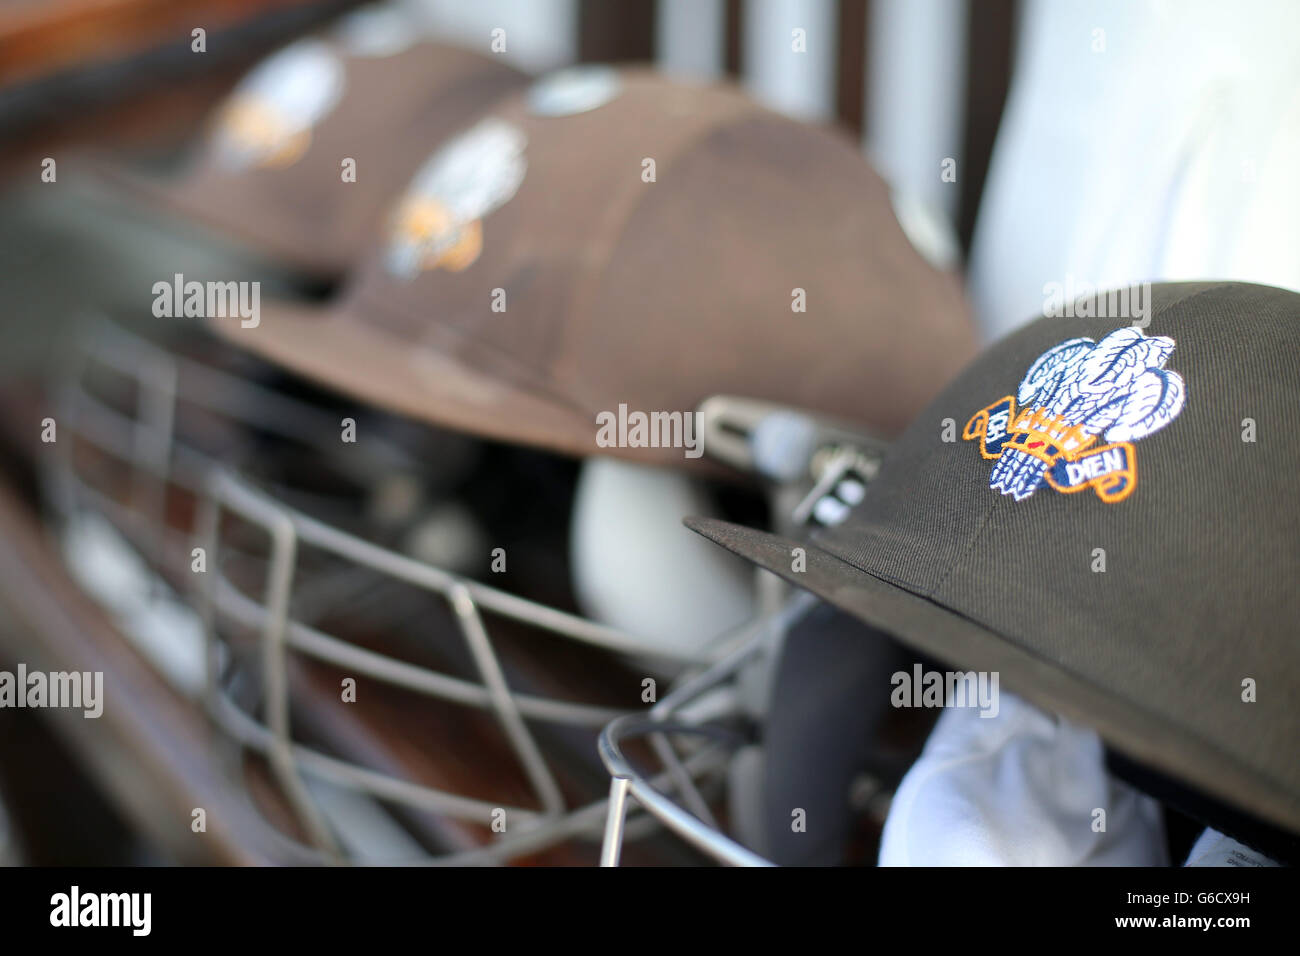 Cricket - LV=County Championship - Division One - Surrey v Middlesex - The Kia Oval. Detail view of Surrey helmets and pads Stock Photo